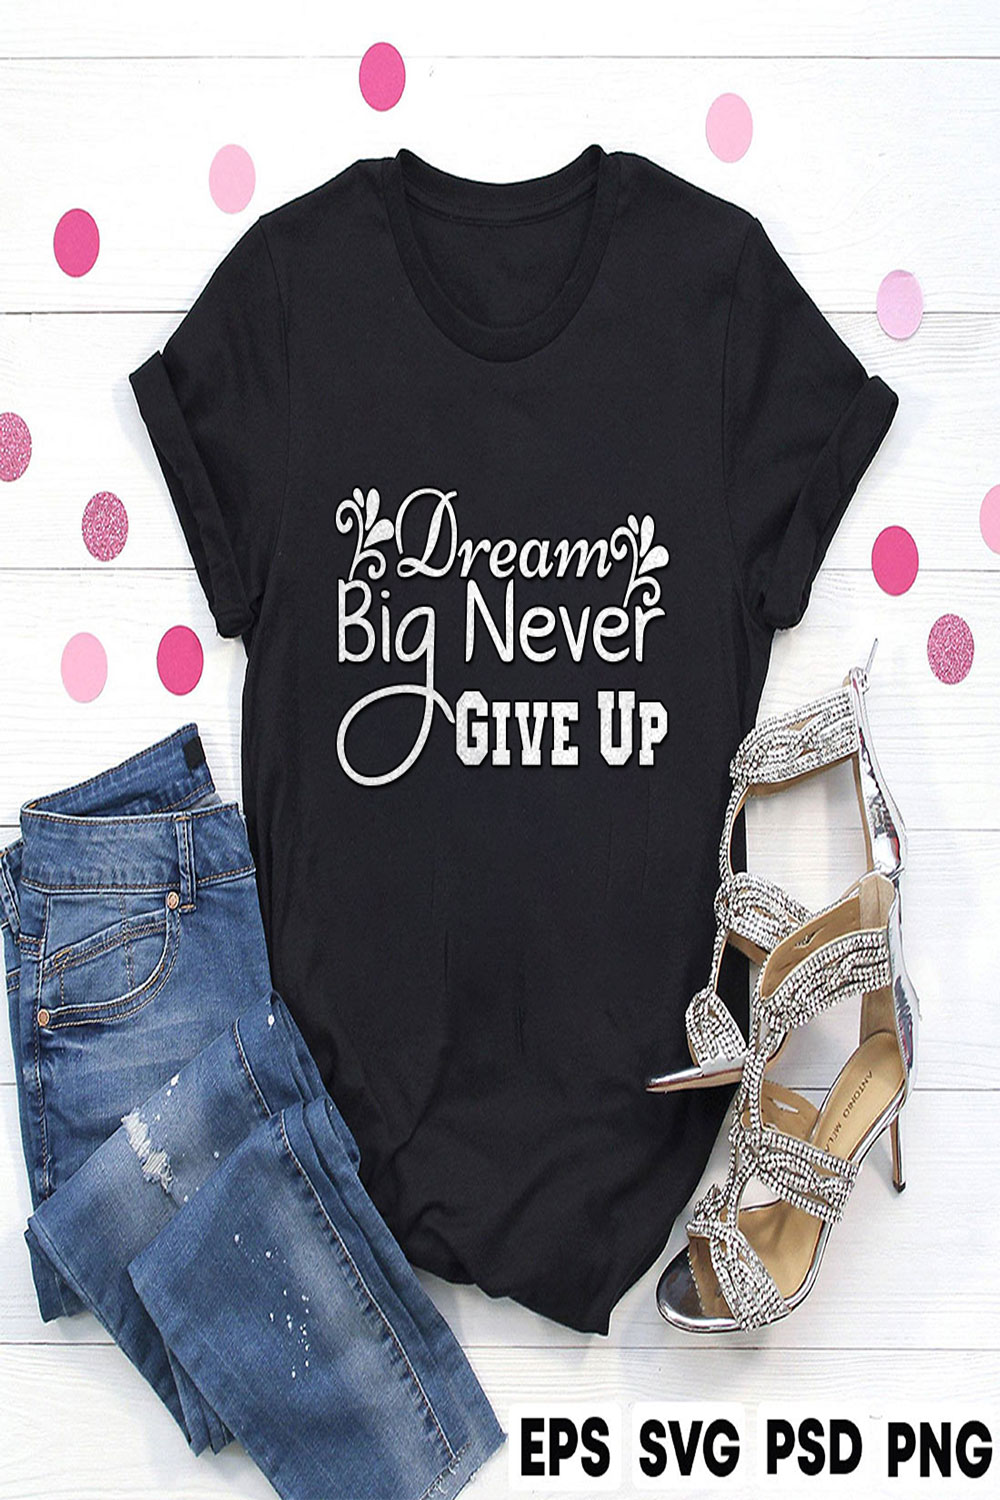 Dream big never give up pinterest preview image.